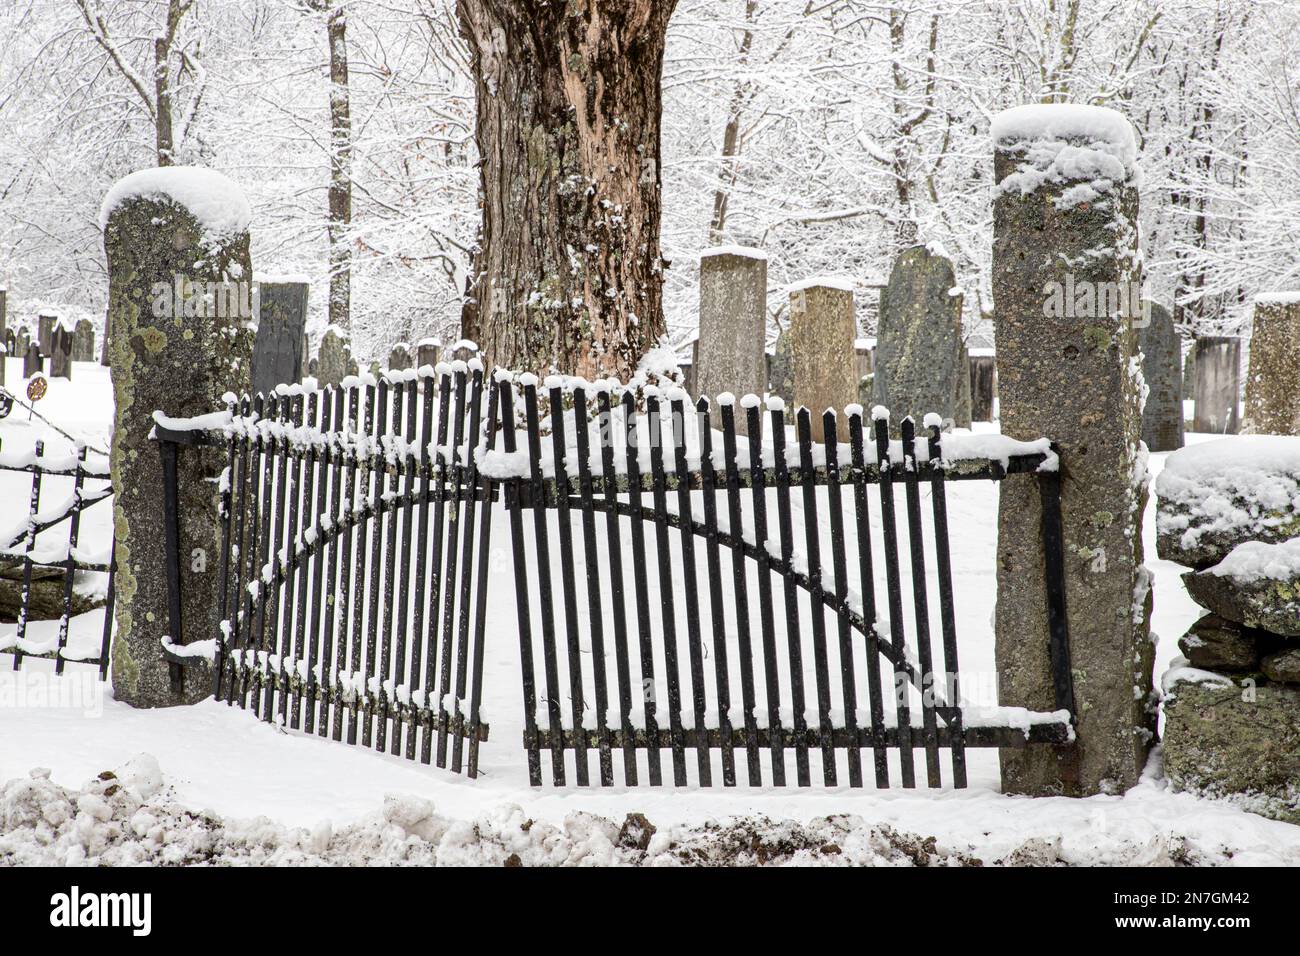 A winter storm covered everything in snow in Phillipston, Massachusetts Stock Photo